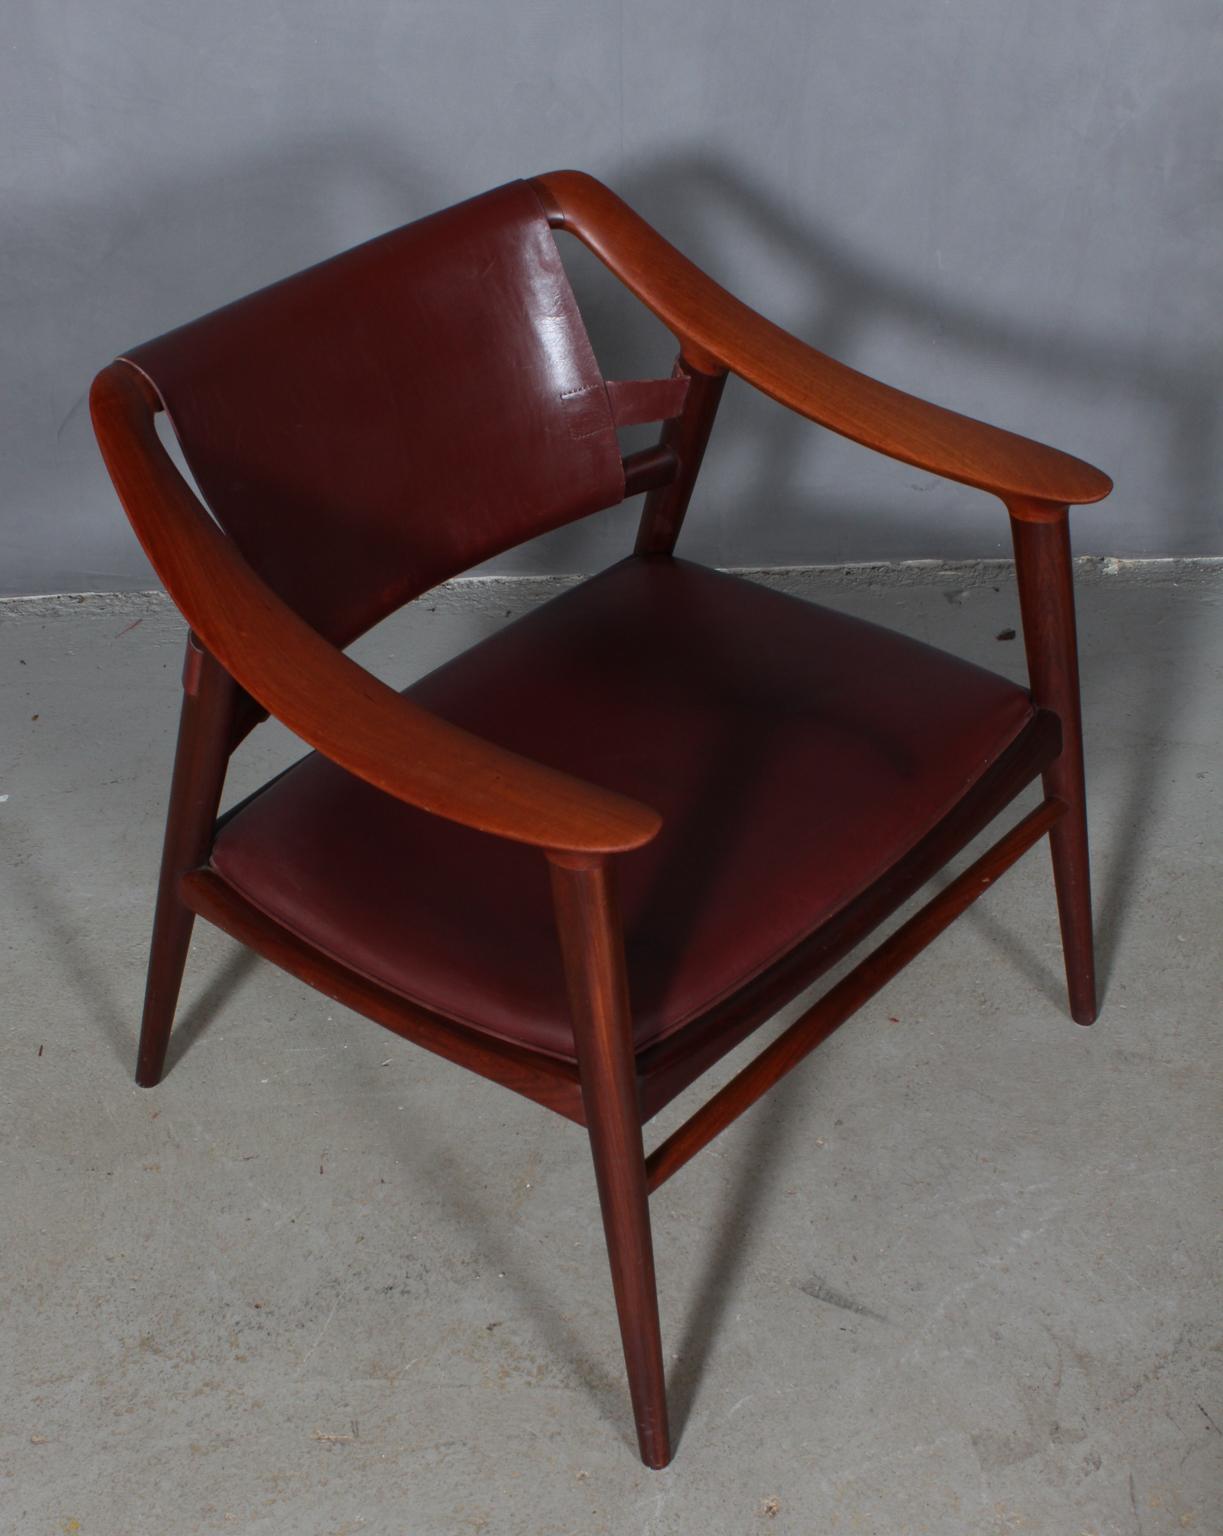 Rolf Rastad & Adolf Relling for Gustav Bahus armchair model 56/2 'Bambi', teak and leather, Norway, circa 1954.

Excellent example of the 'Bambi' chair of Rolf Rastad and Adolf Reling. This edition consist of a teak frame and Indian red leather